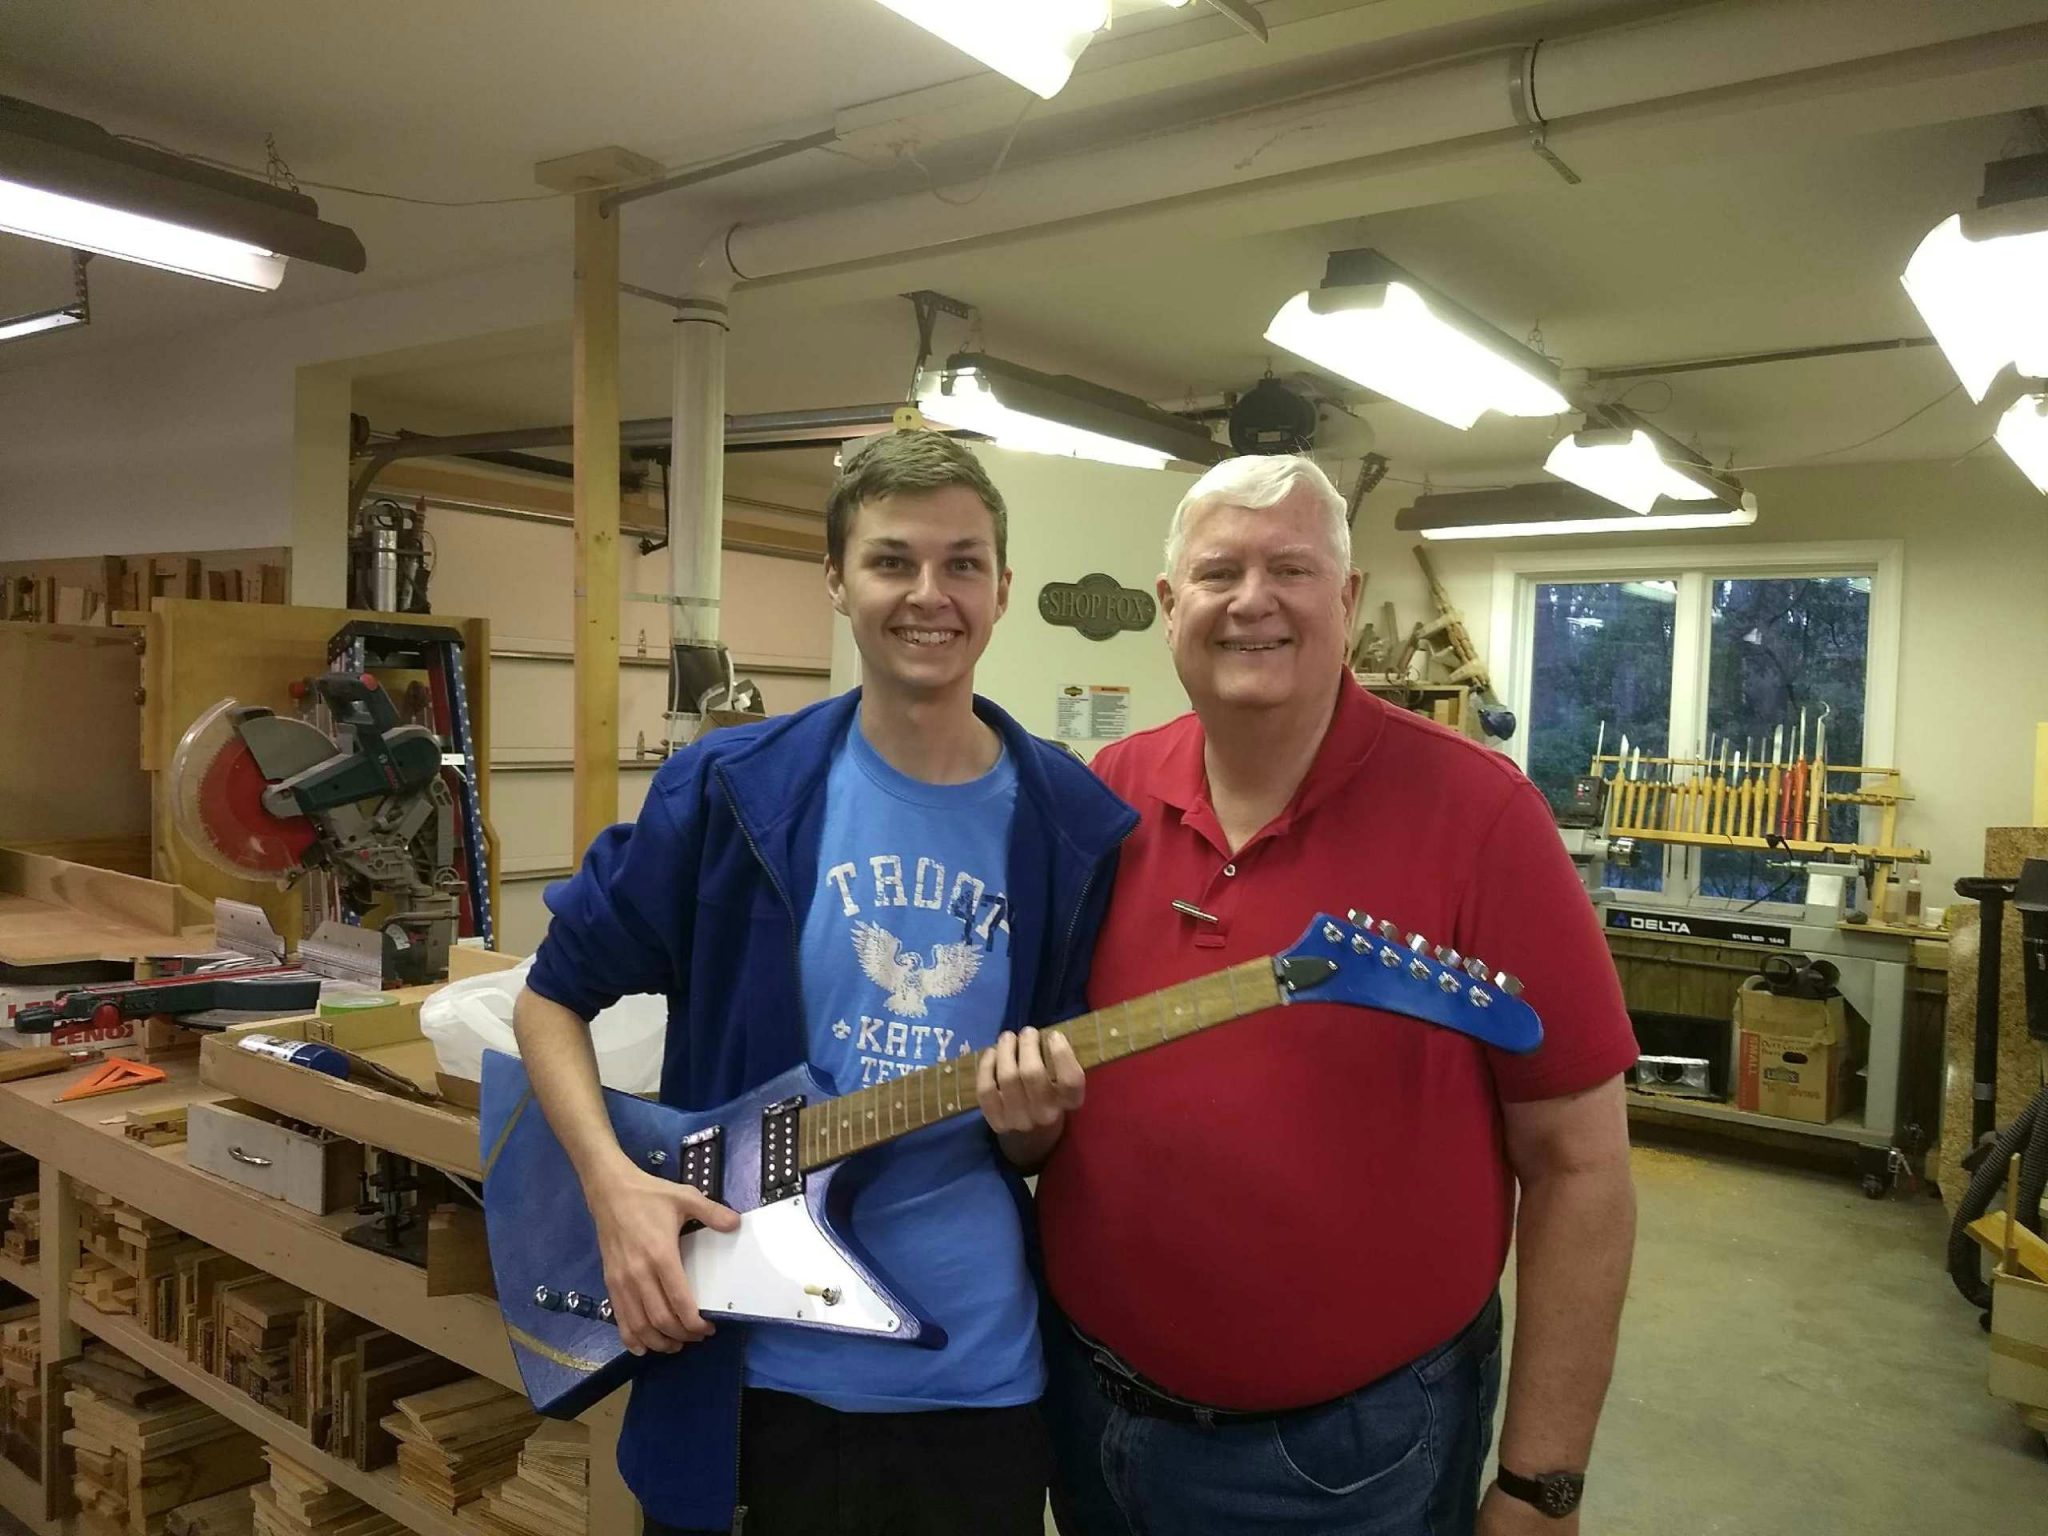 Mahogany guitar kit built and finished with and for Grandson, Jim